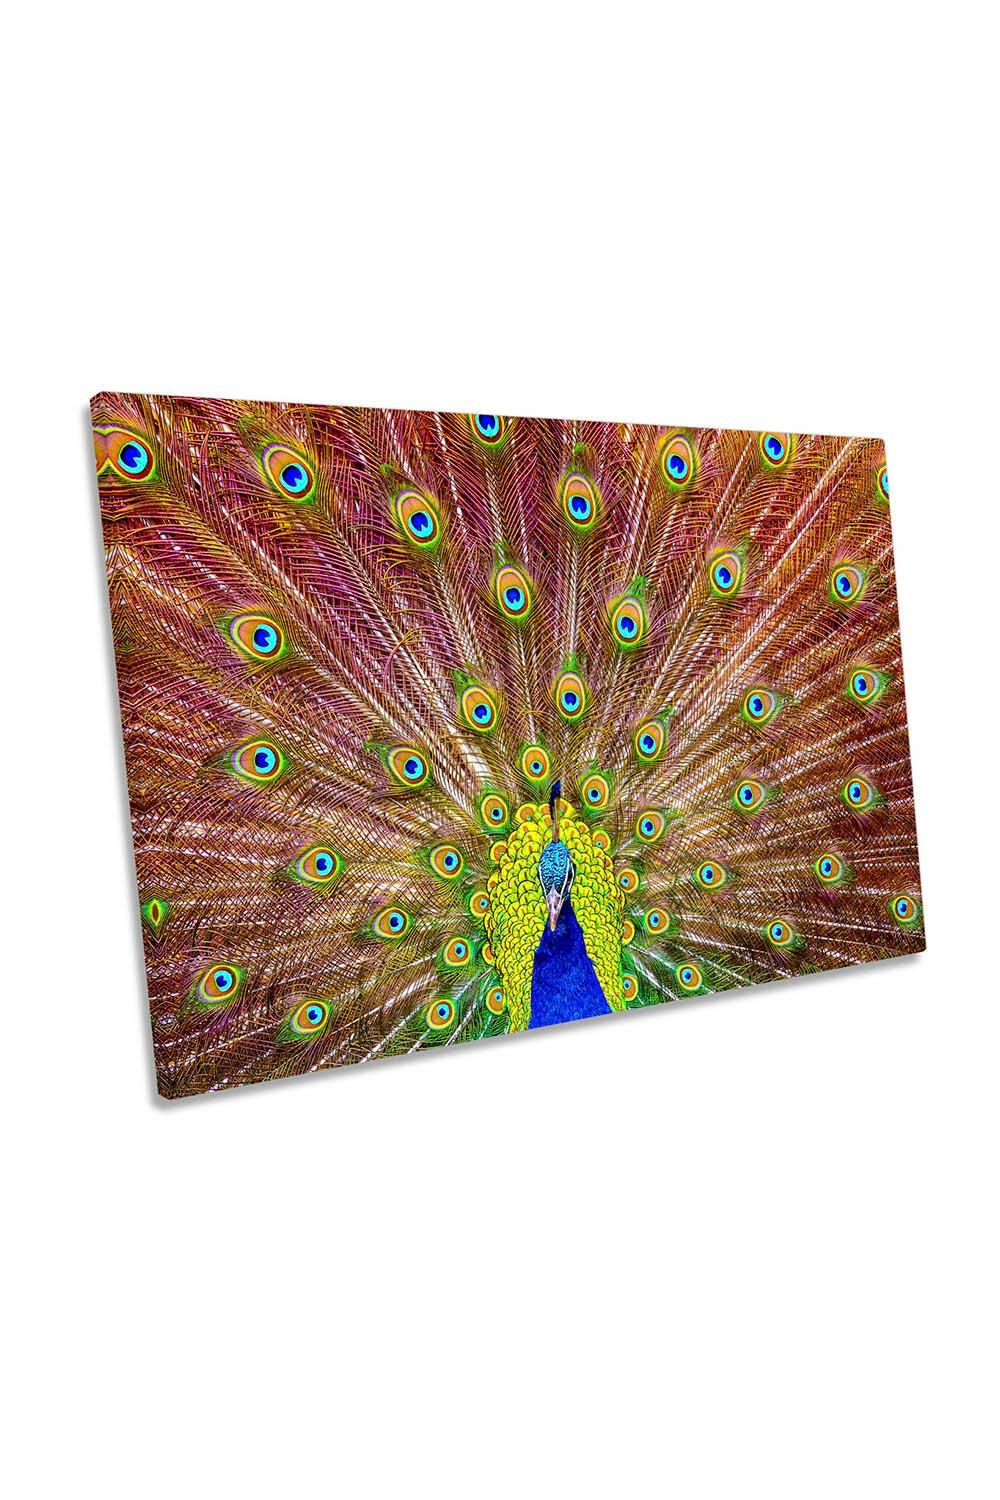 Peacock Feathers Bird Canvas Wall Art Picture Print